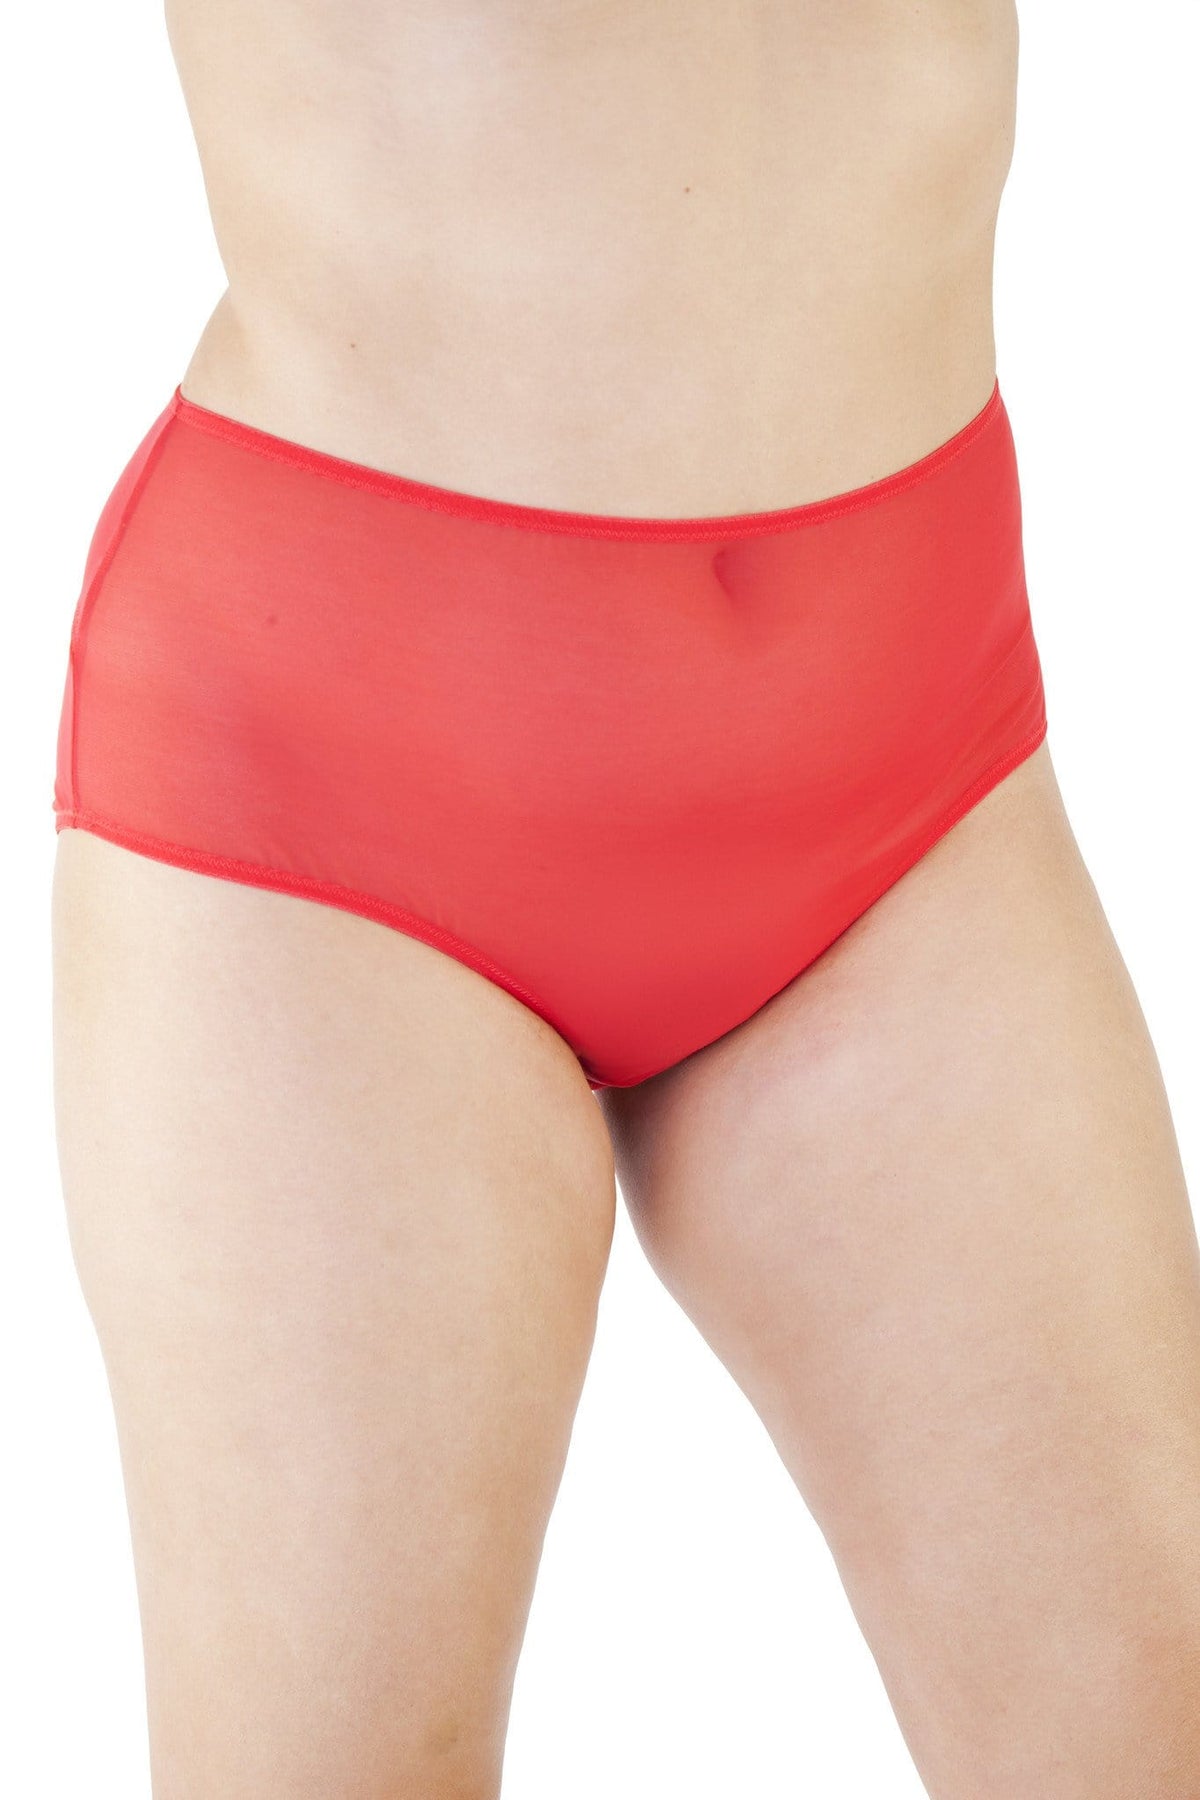 Juliet Red Roll On Girdle Curve – Playful Promises USA